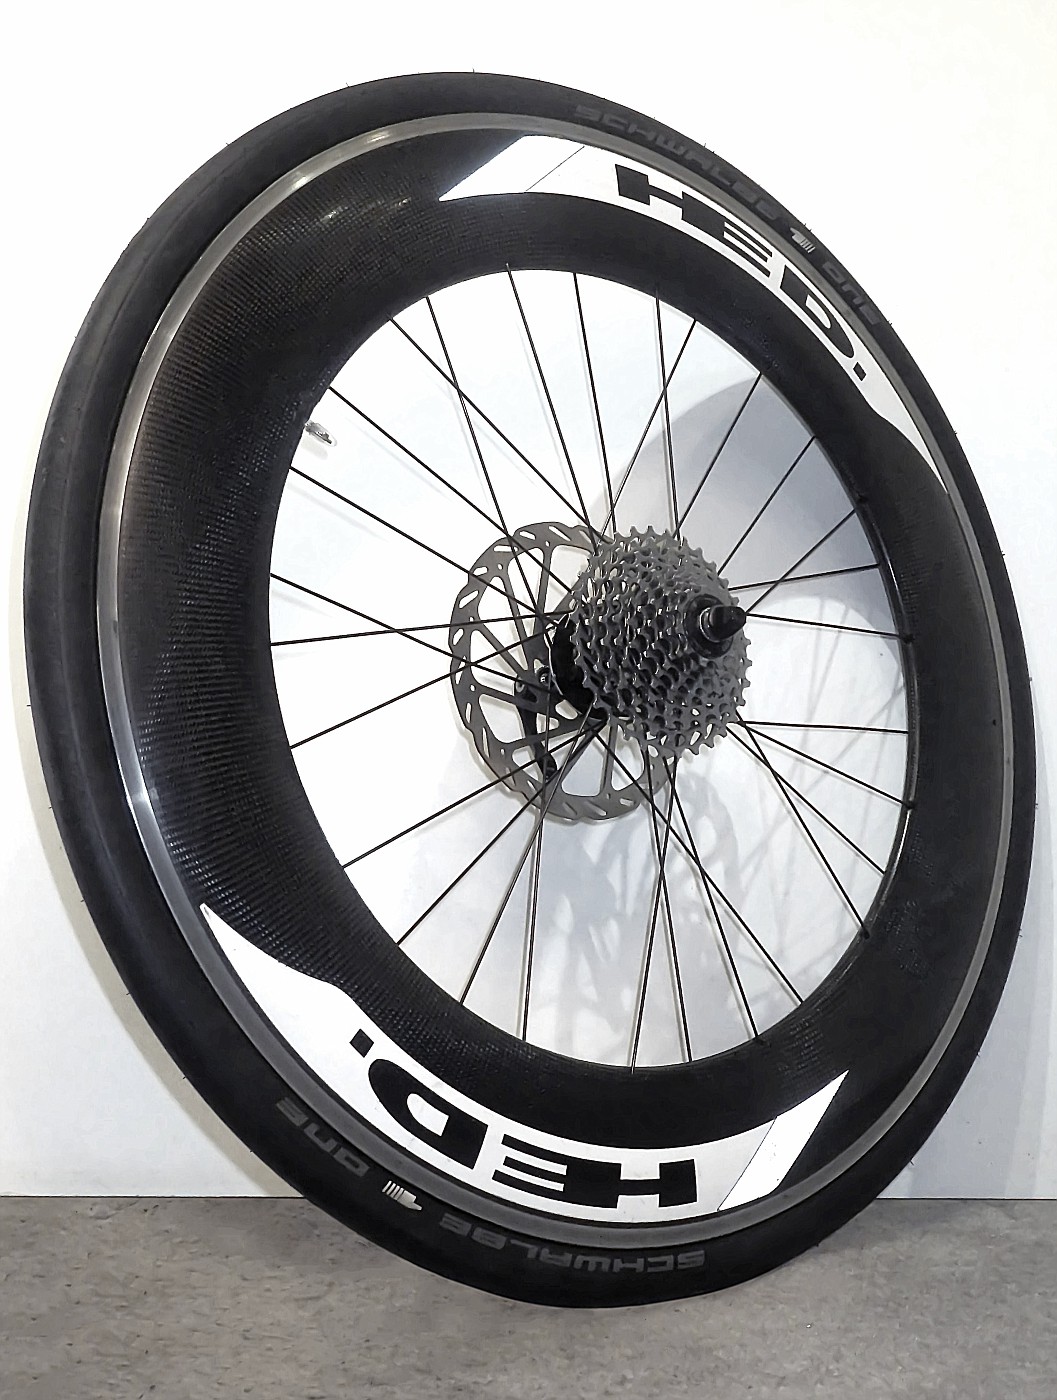 Rear wheel - ready re-spoked and centered